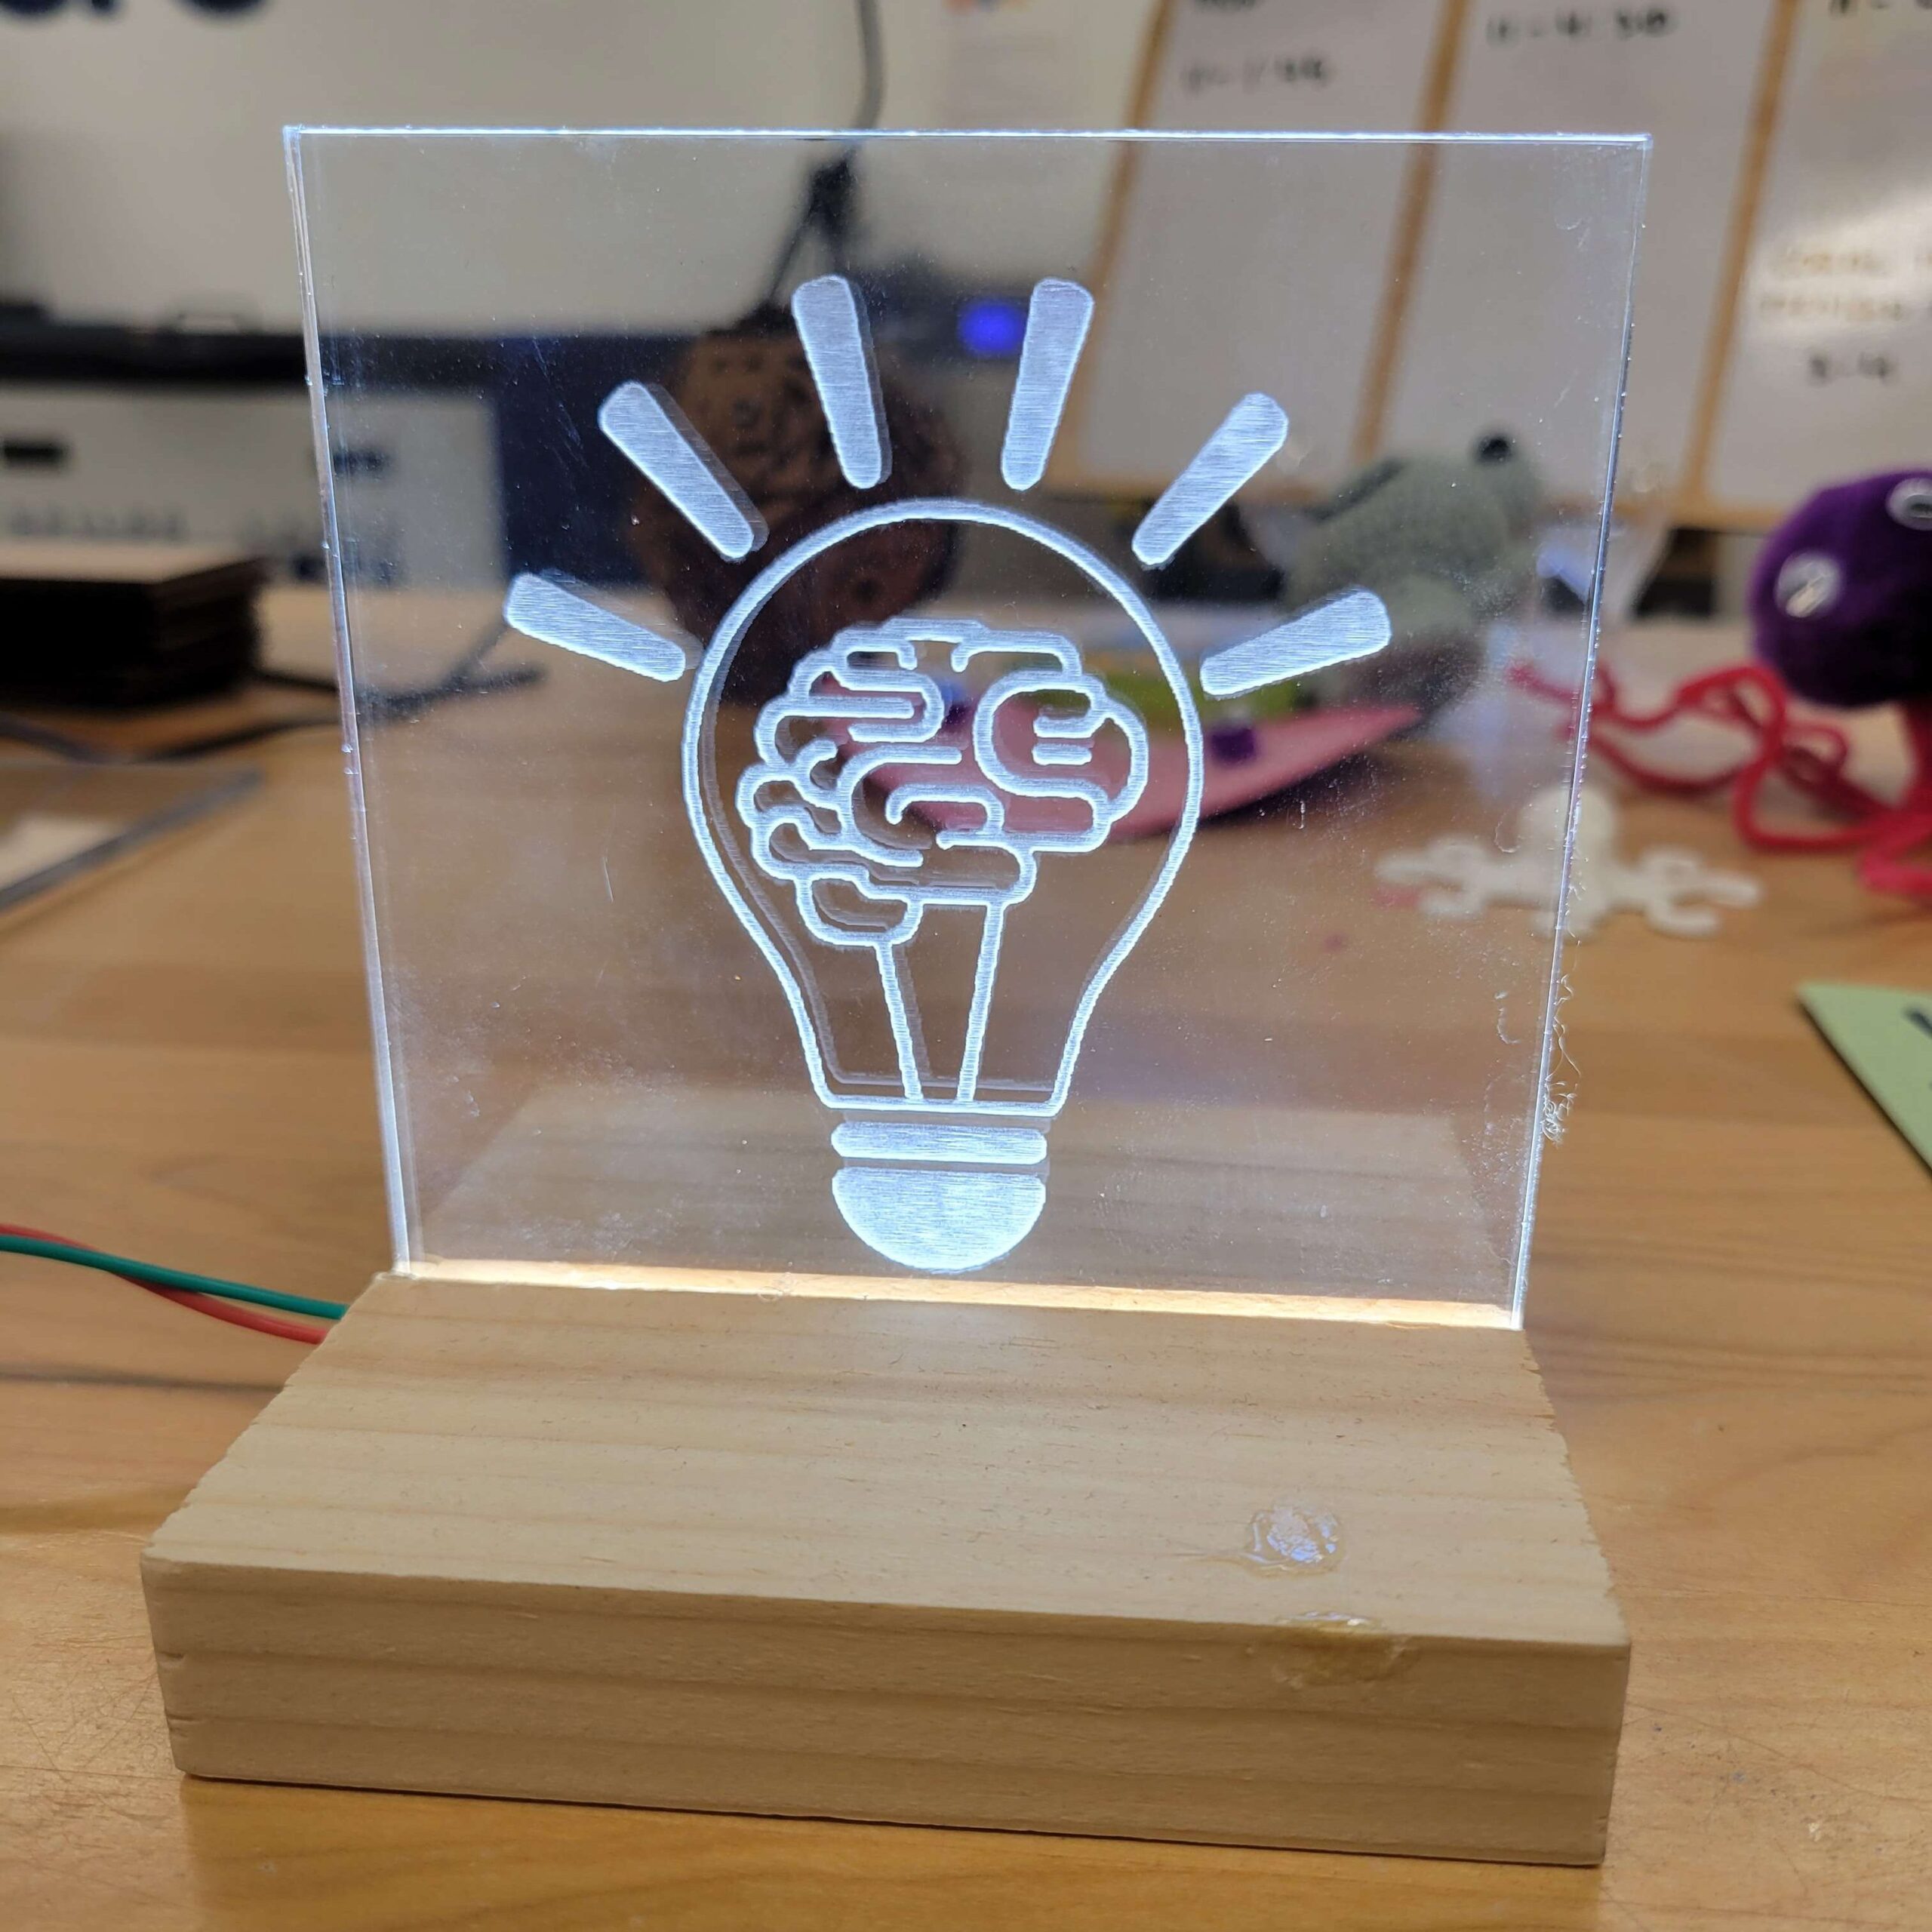 lineart of a lightbulb with a brain inside is etched into a piece of clear acrylic and is glowing.